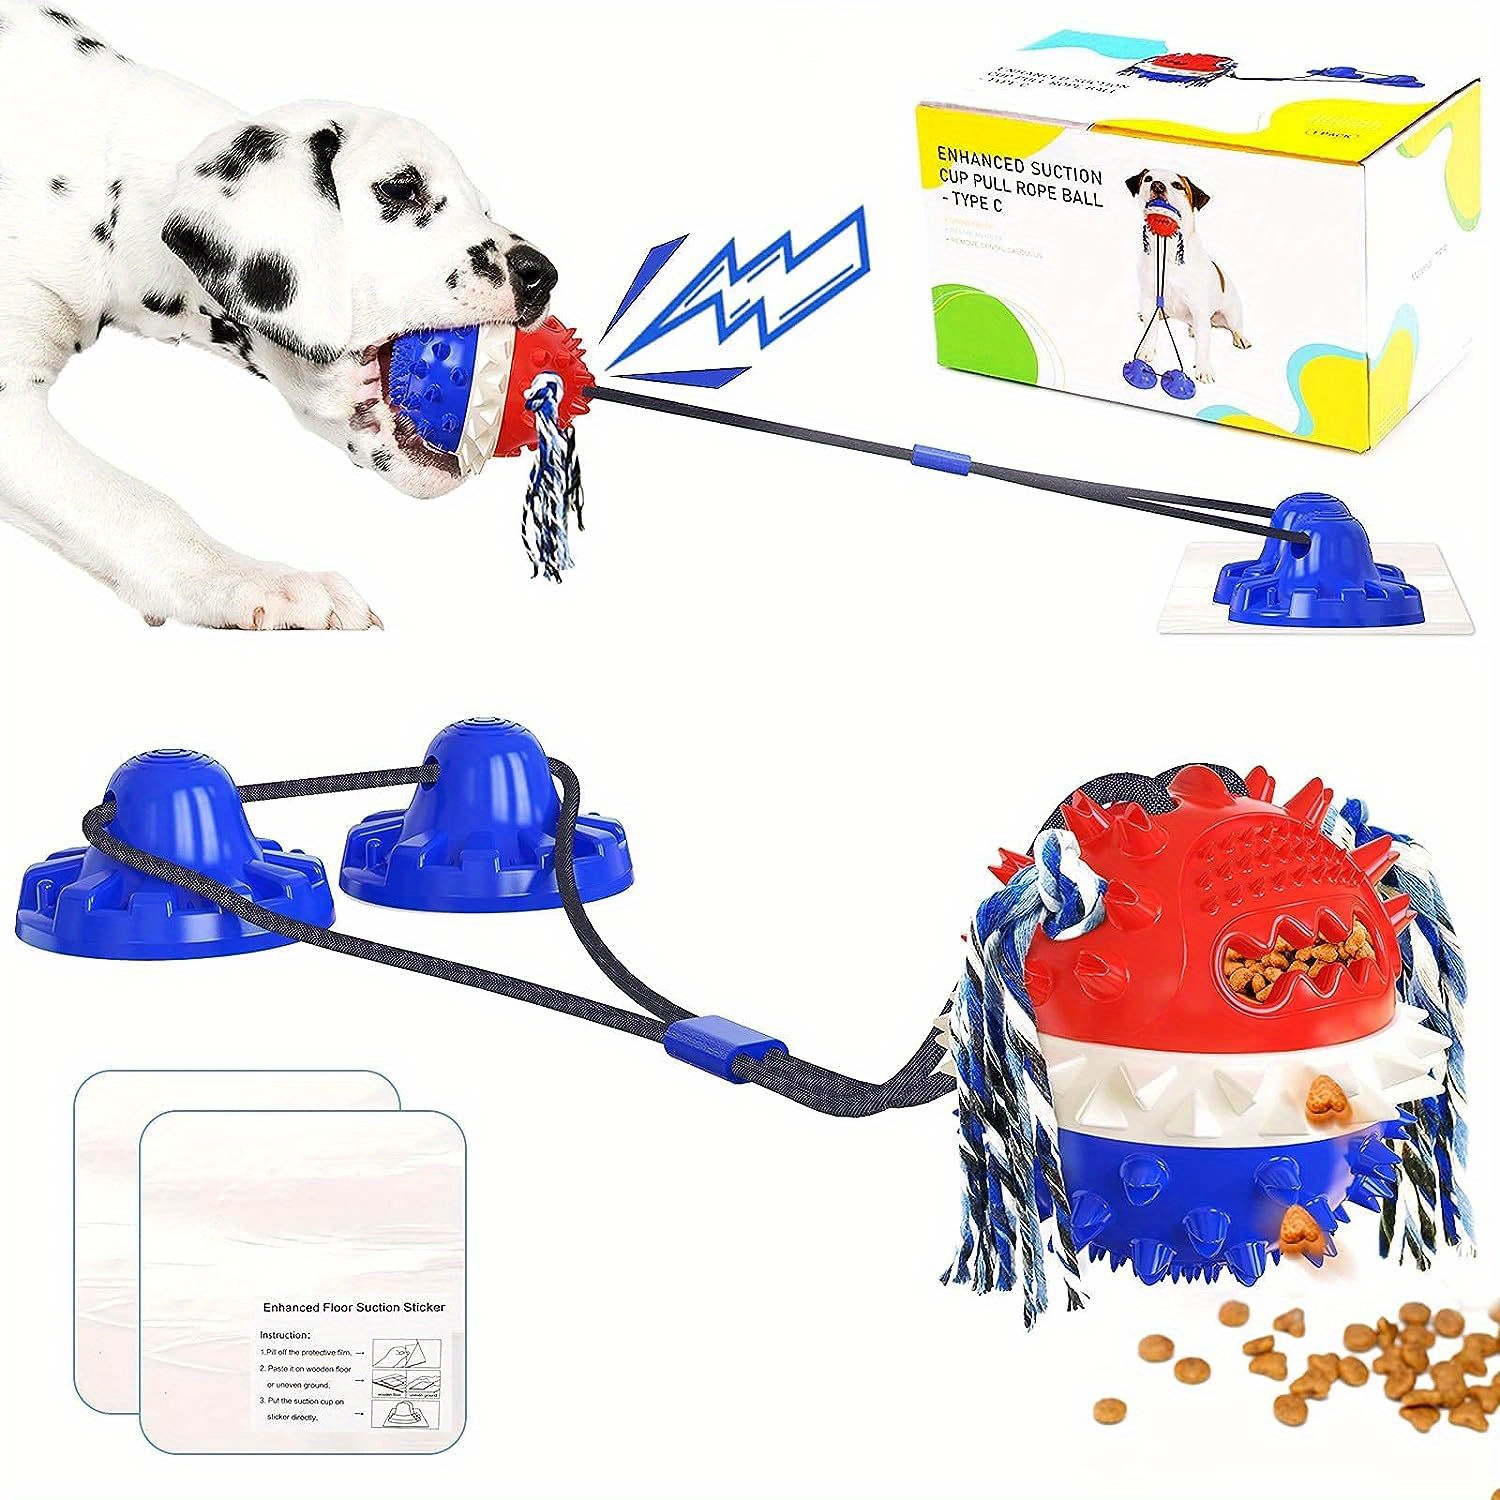 Dogs Dog Accessories Supplies, Interactive Dog Toys Puzzles